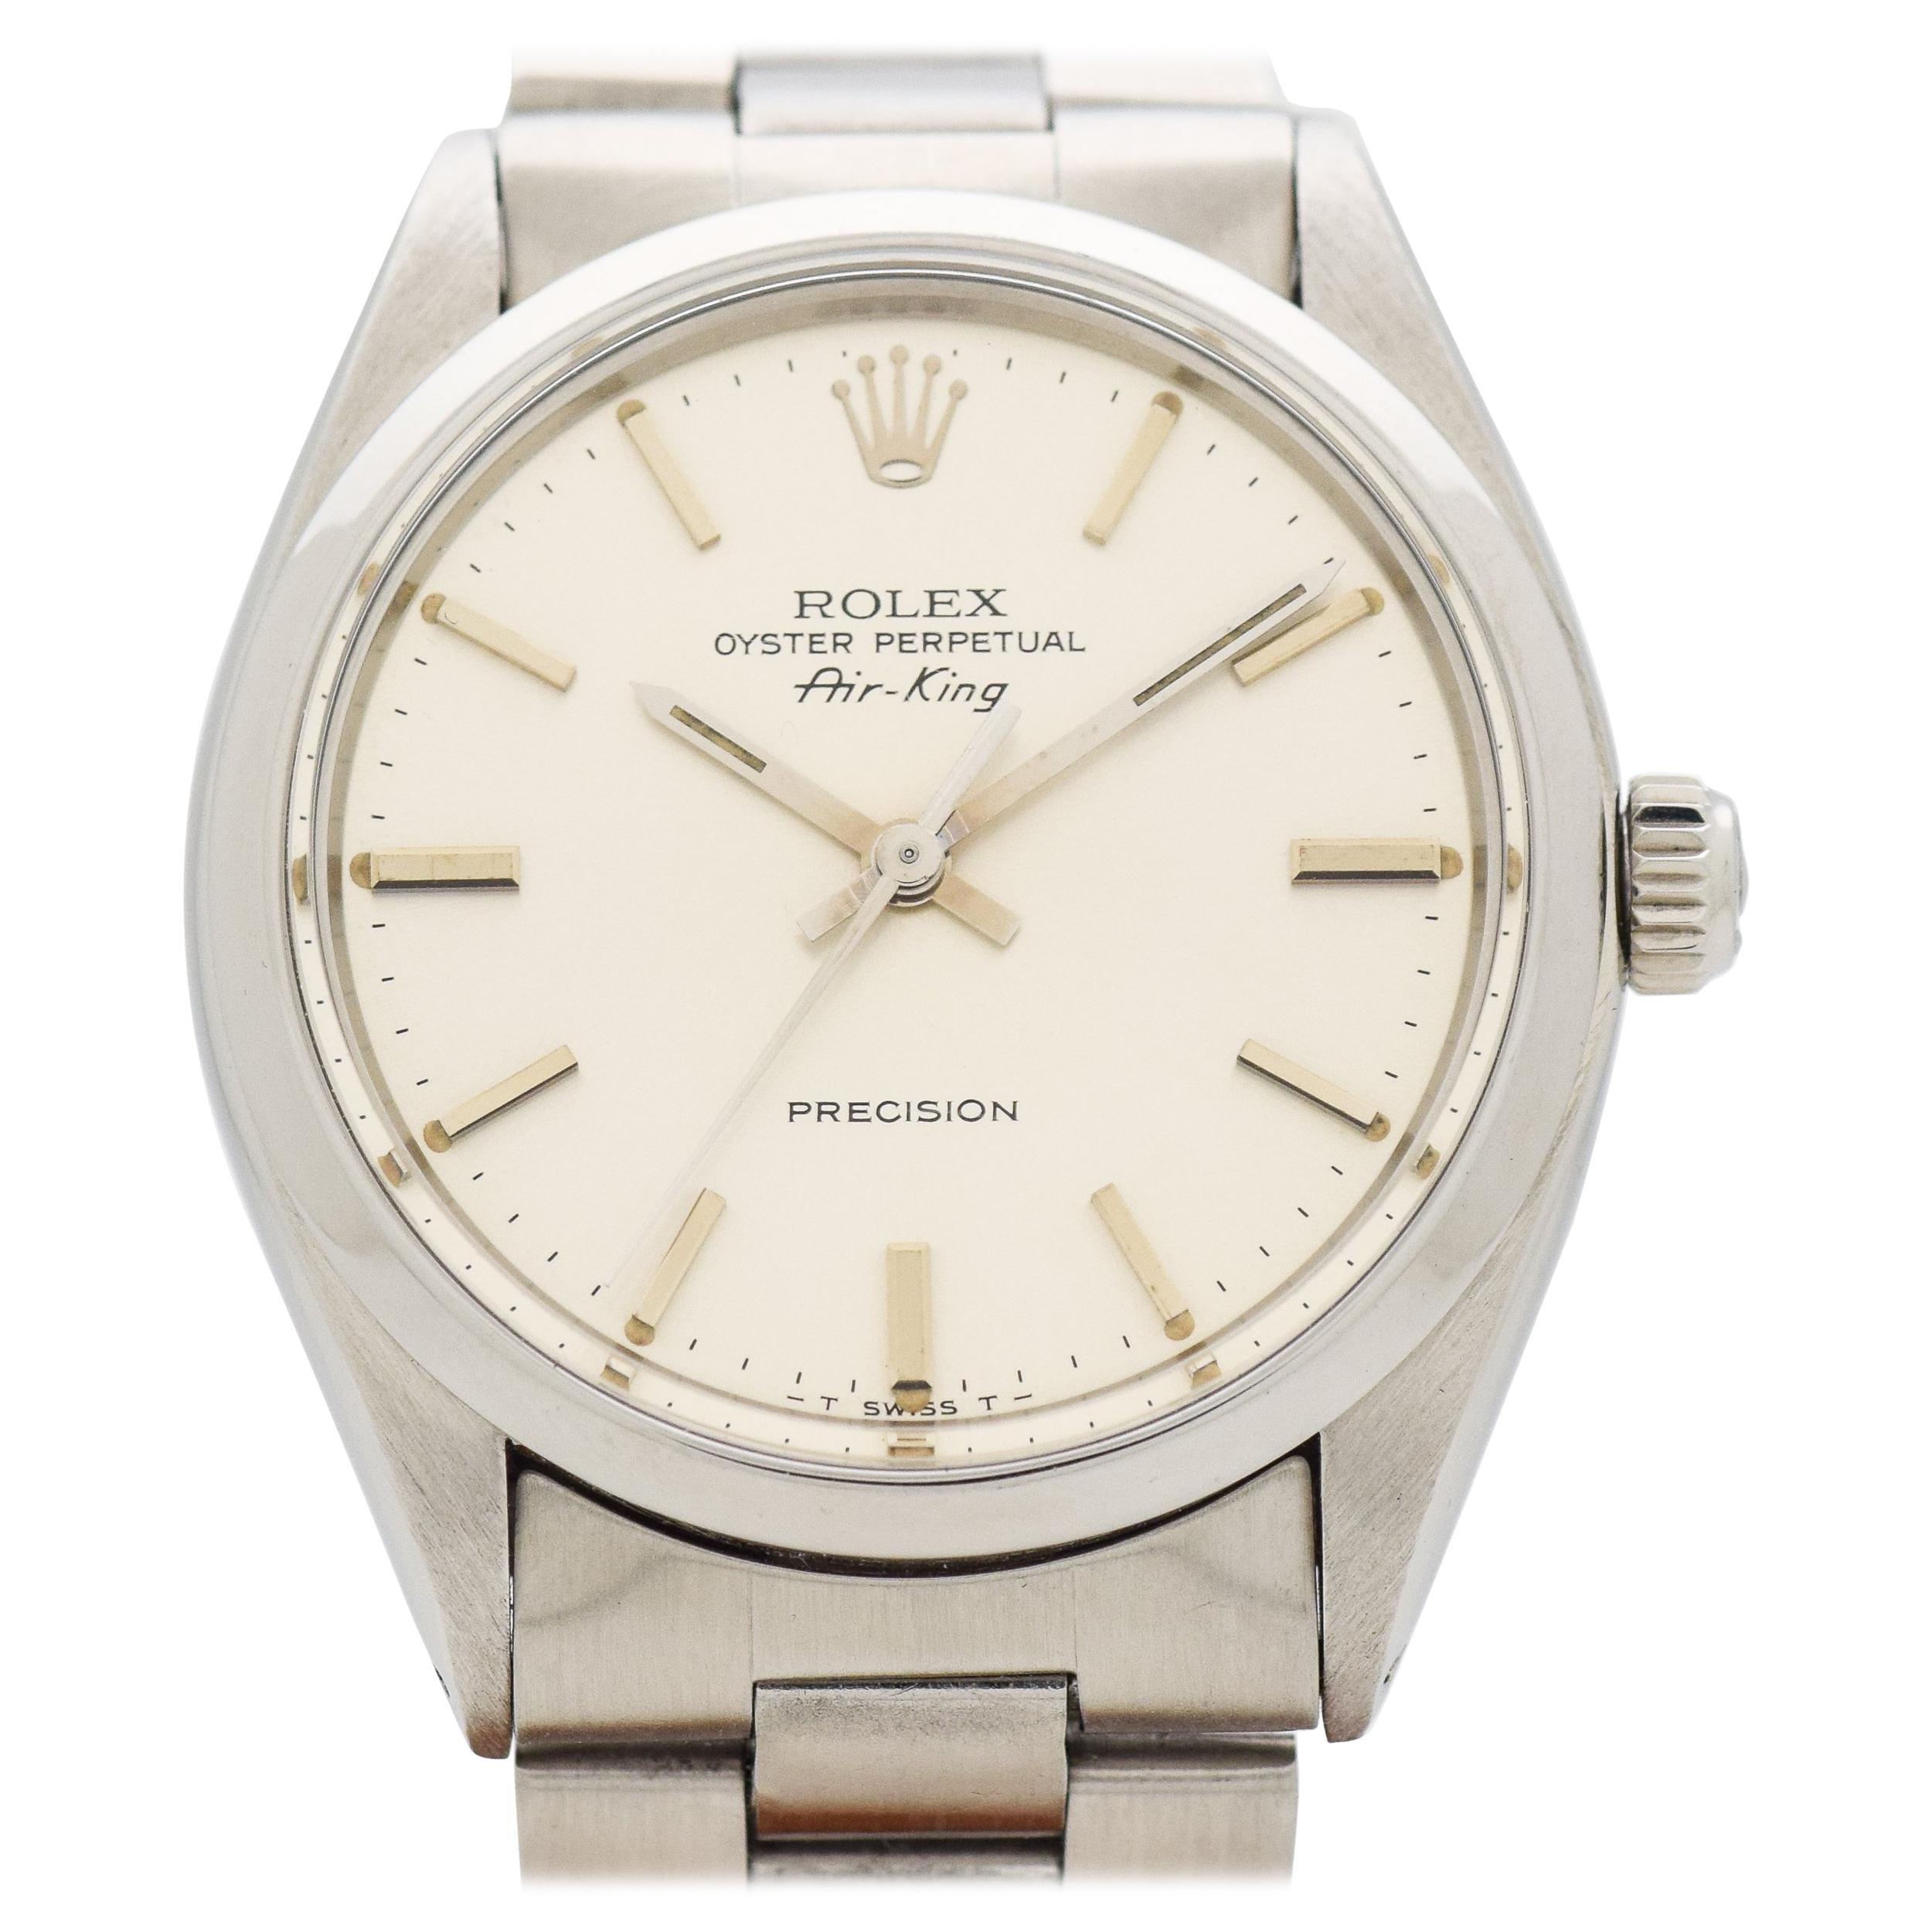 Vintage Rolex Air-King Reference 5500/1002 Stainless Steel Watch, 1979